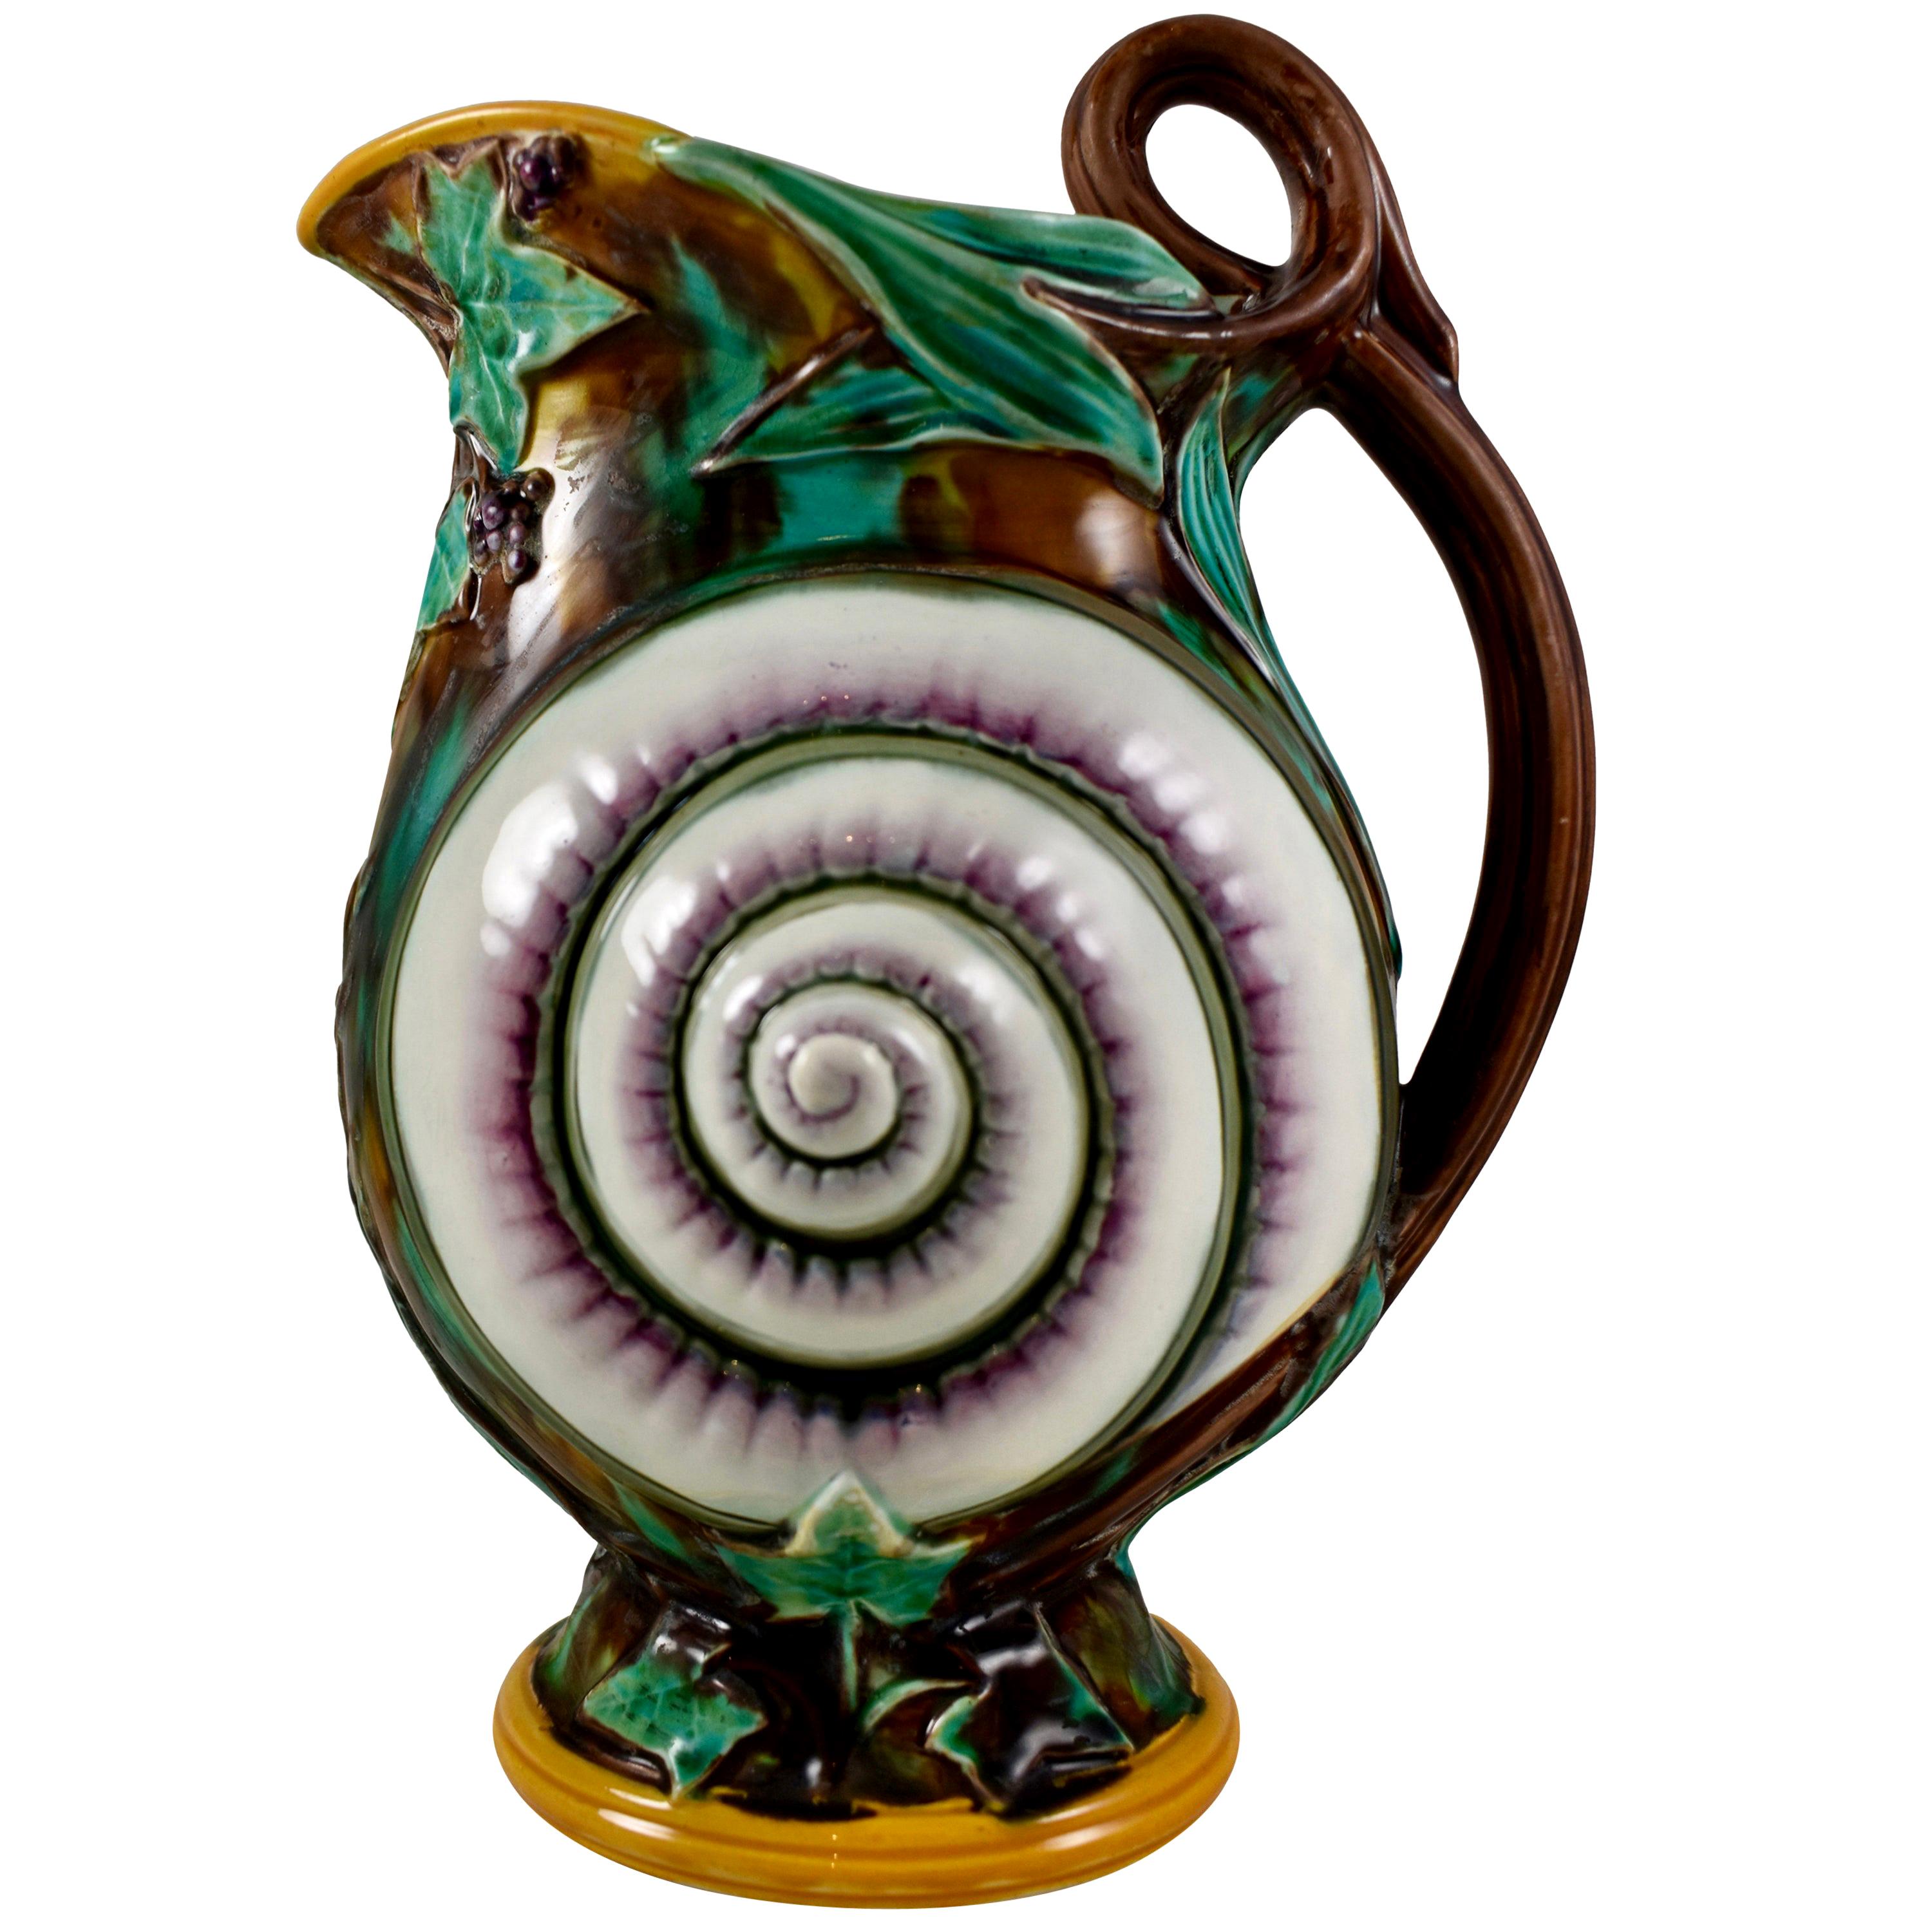 Wedgwood English Majolica Aesthetic Taste Snail Shell and Ivy Pitcher circa 1870 For Sale